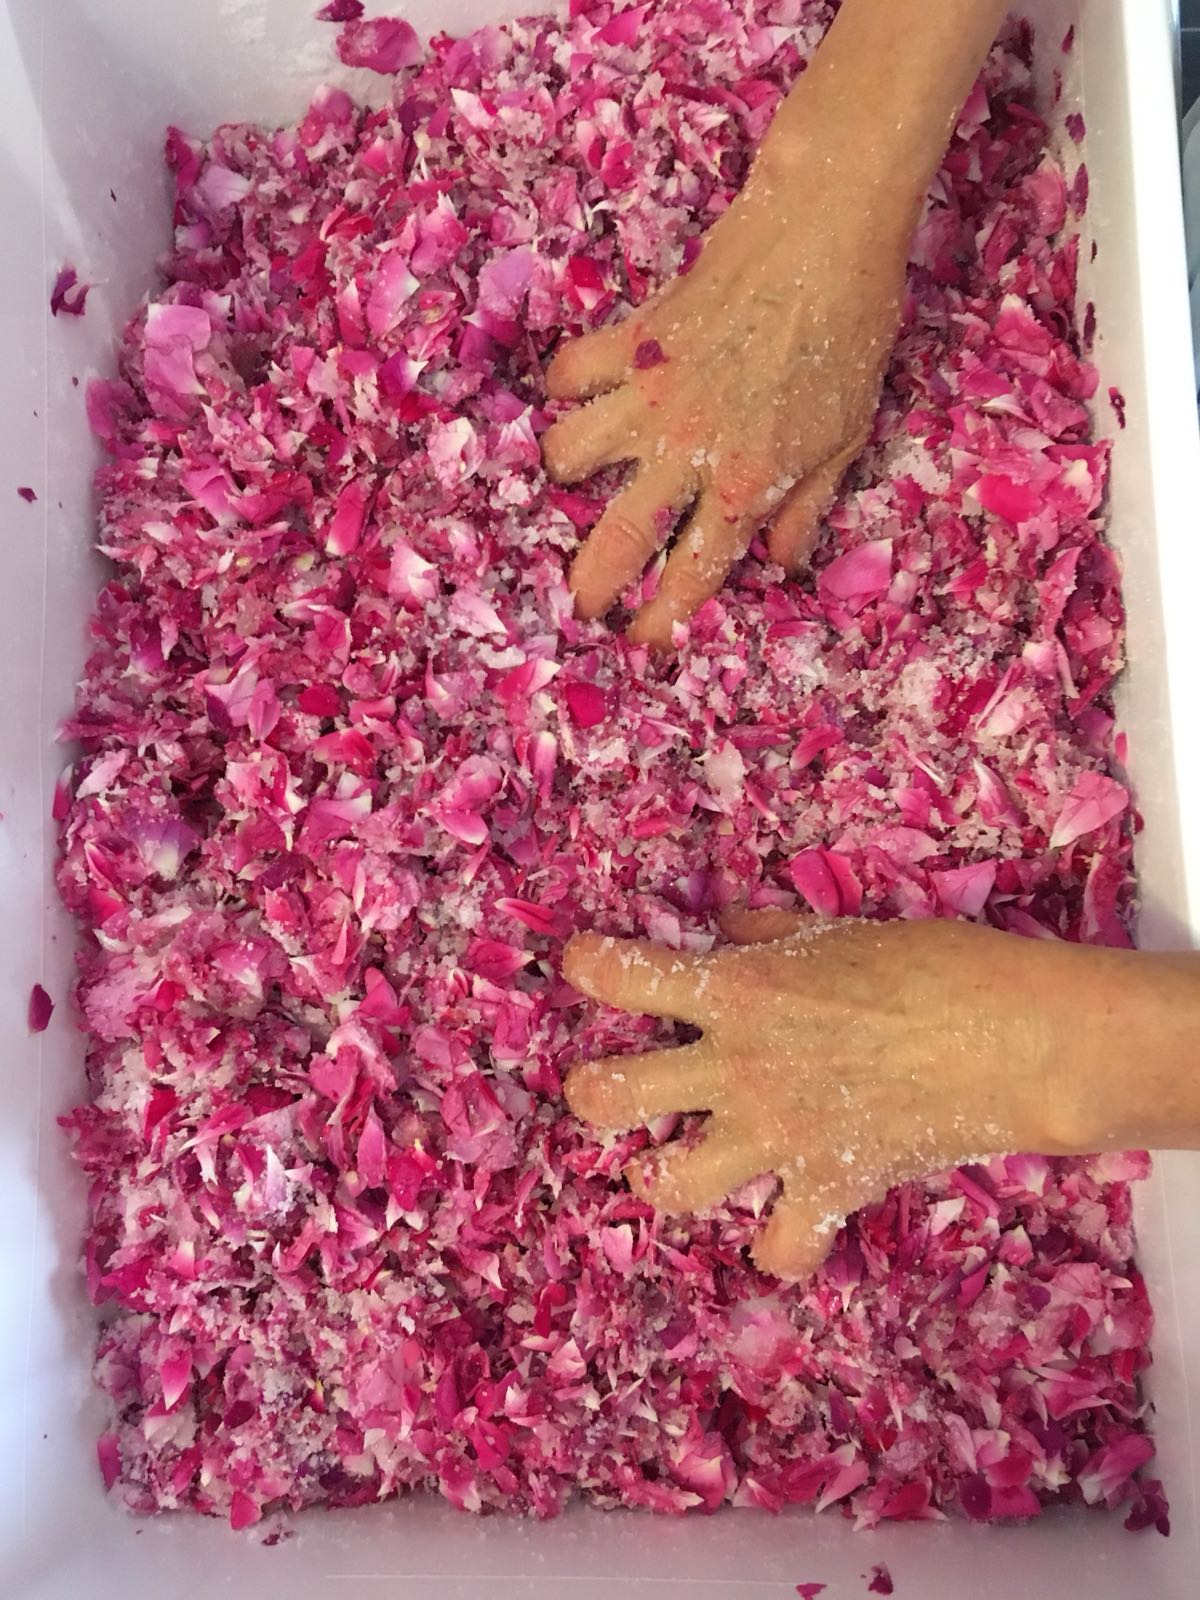 Processing the hand plucked petals from the Duke of Cambridge roses, in the process of making our organic Gulkand.